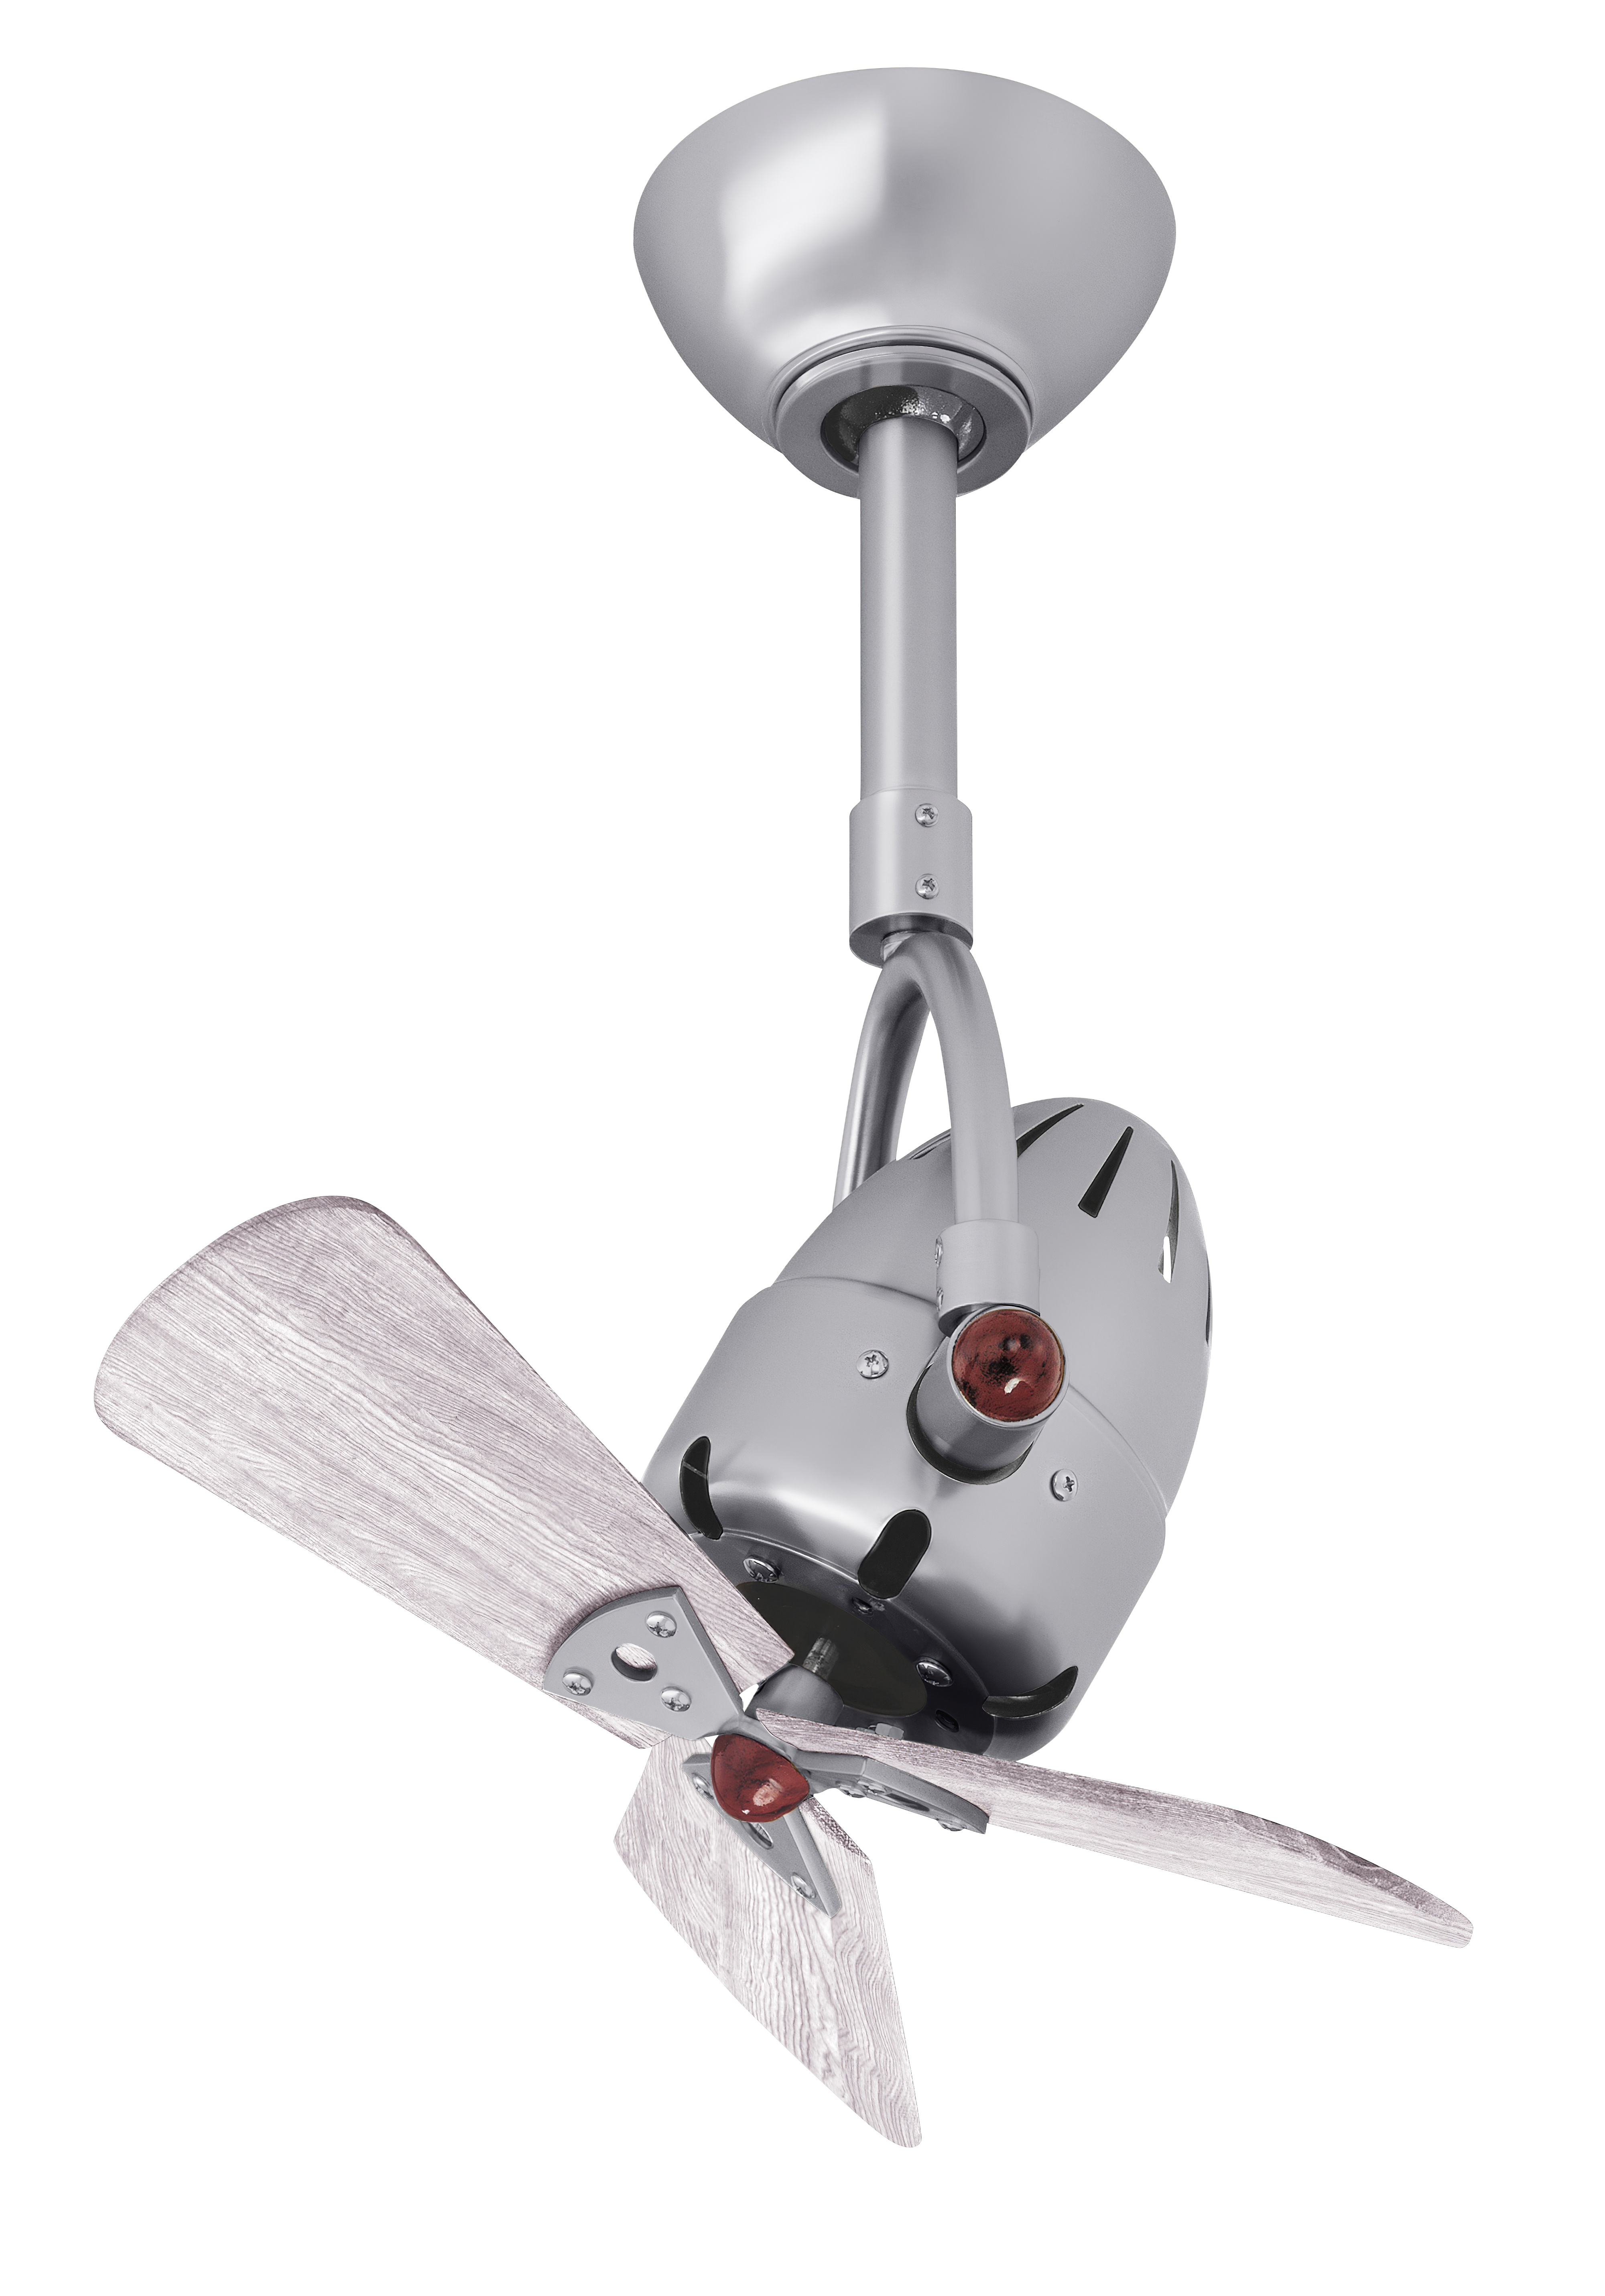 Diane ceiling fan in Brushed Nickel with Barn Wood blades